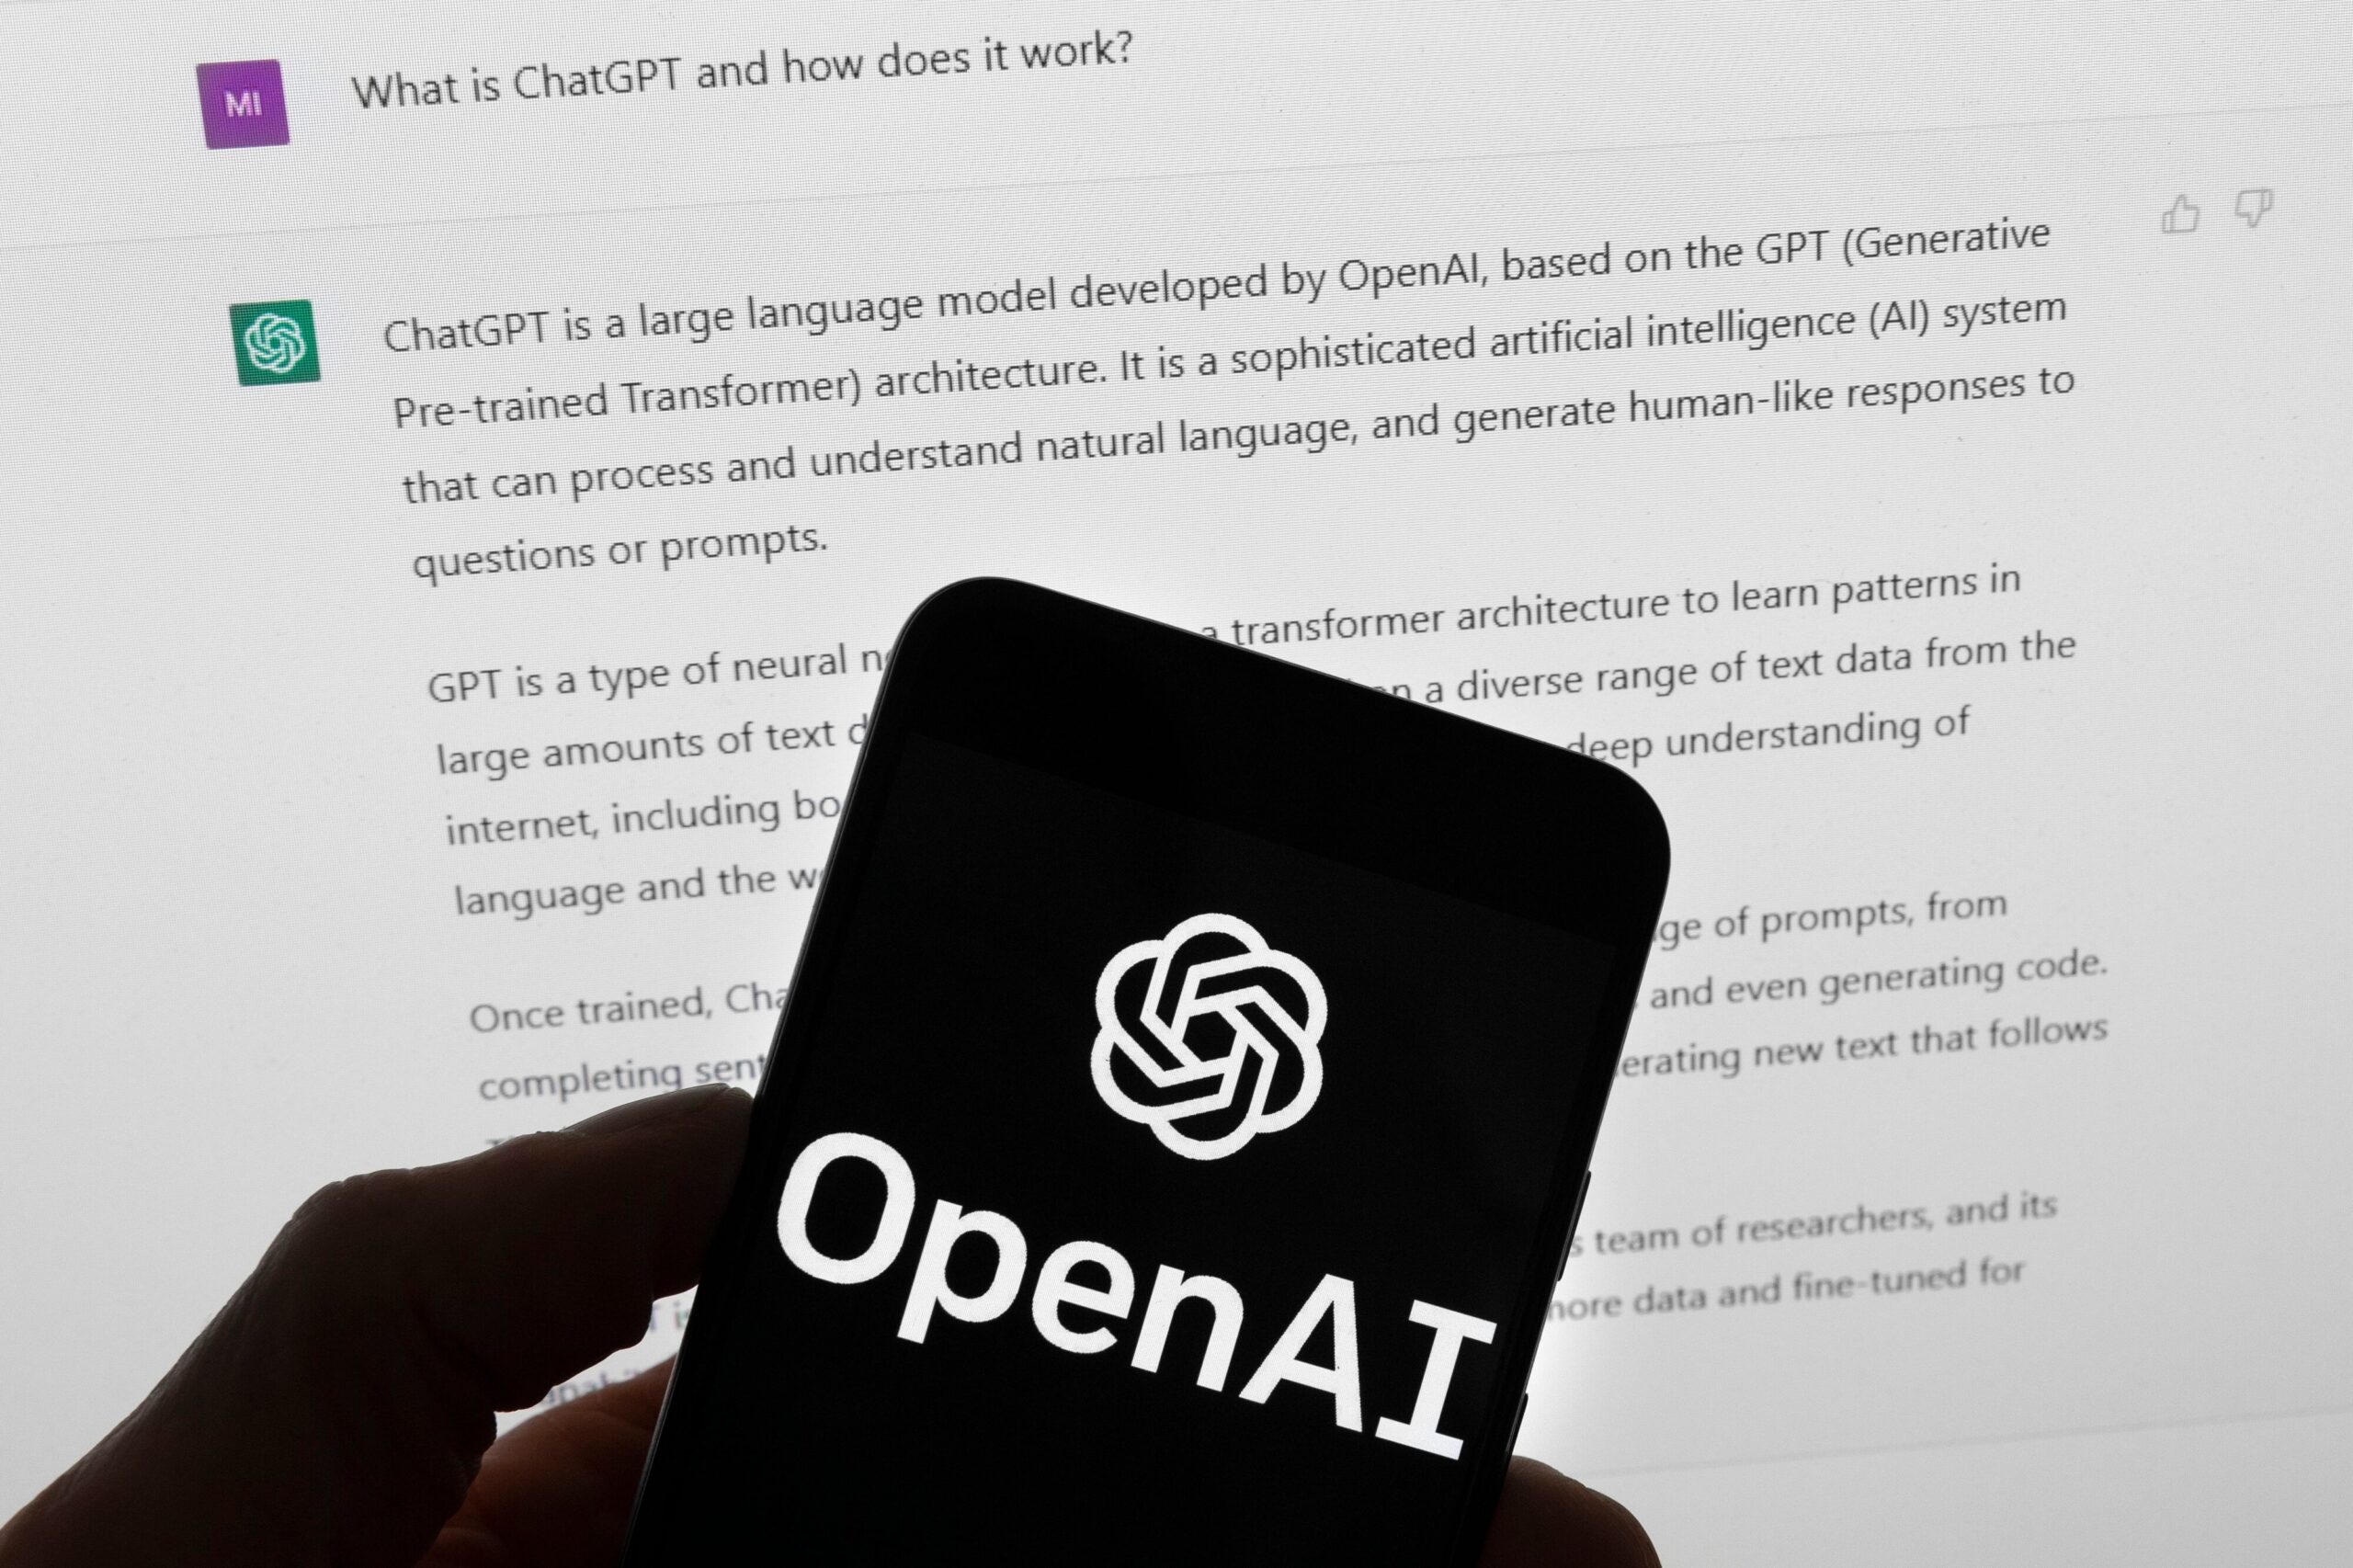 The OpenAI logo is seen on a mobile phone